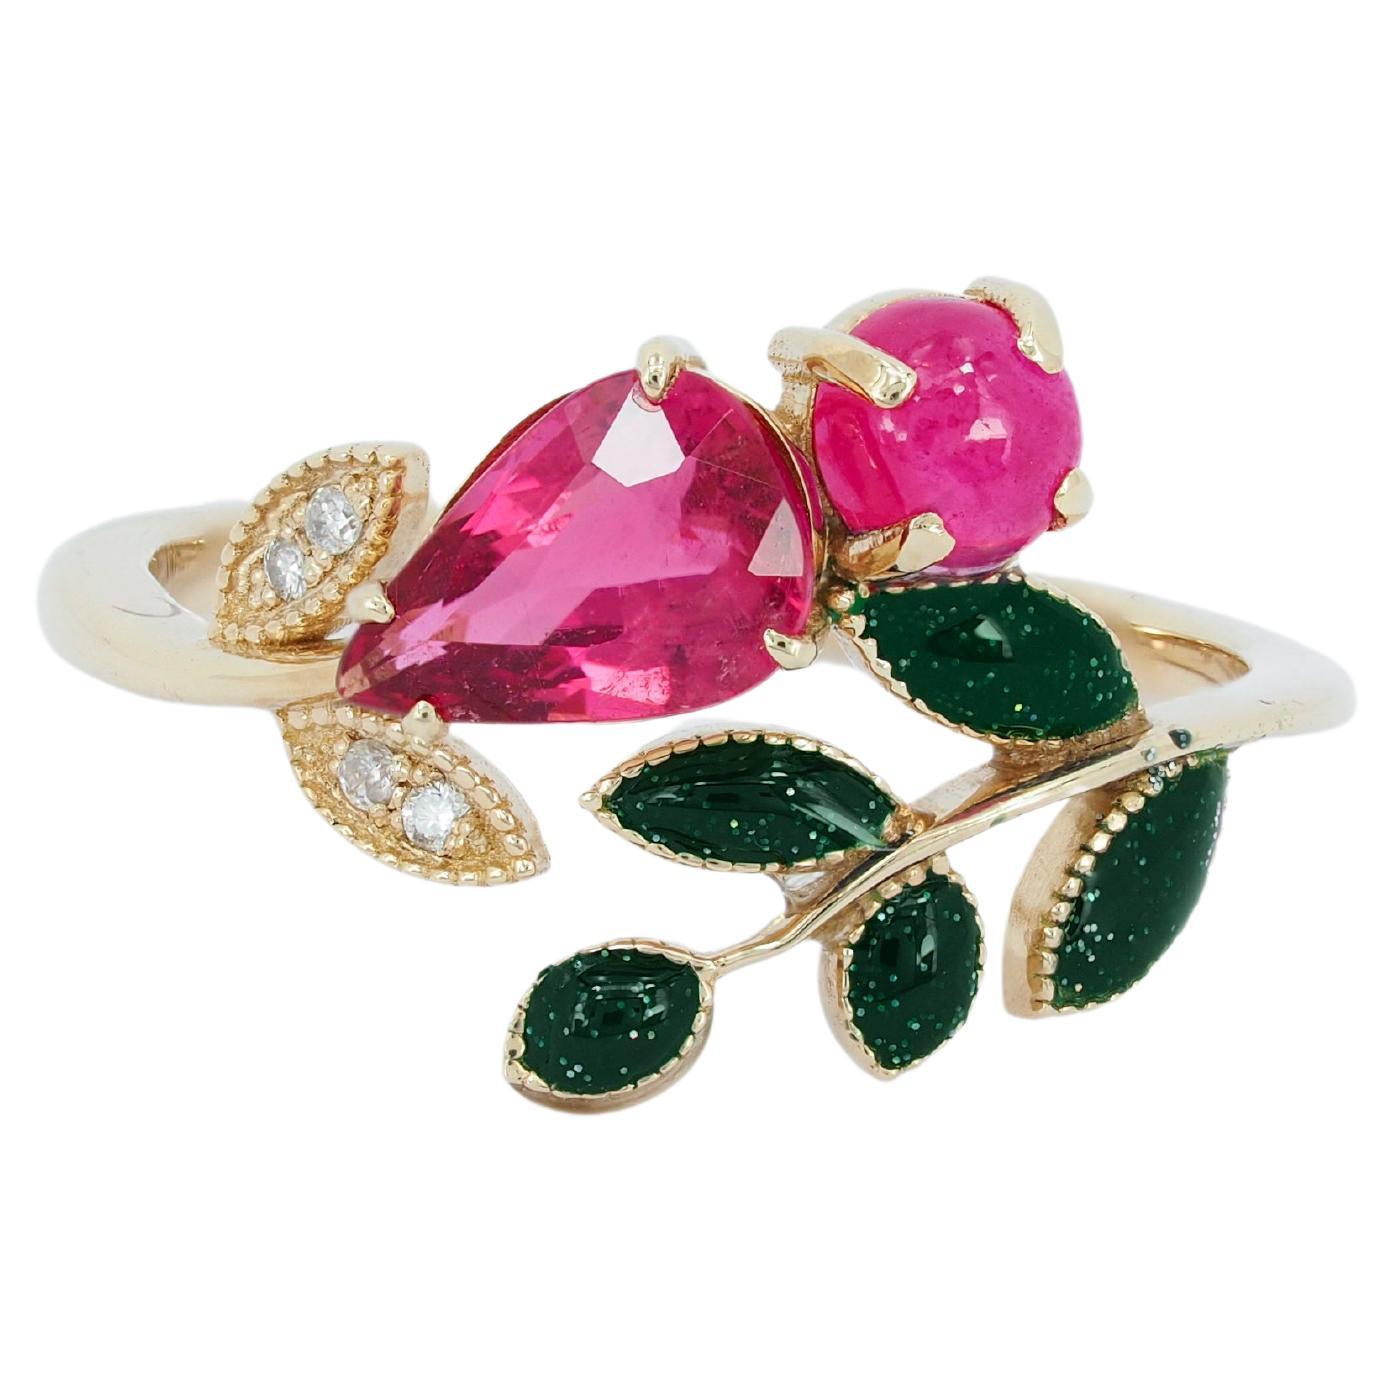 For Sale:  Tourmaline, Ruby and diamonds 14 karat gold ring.